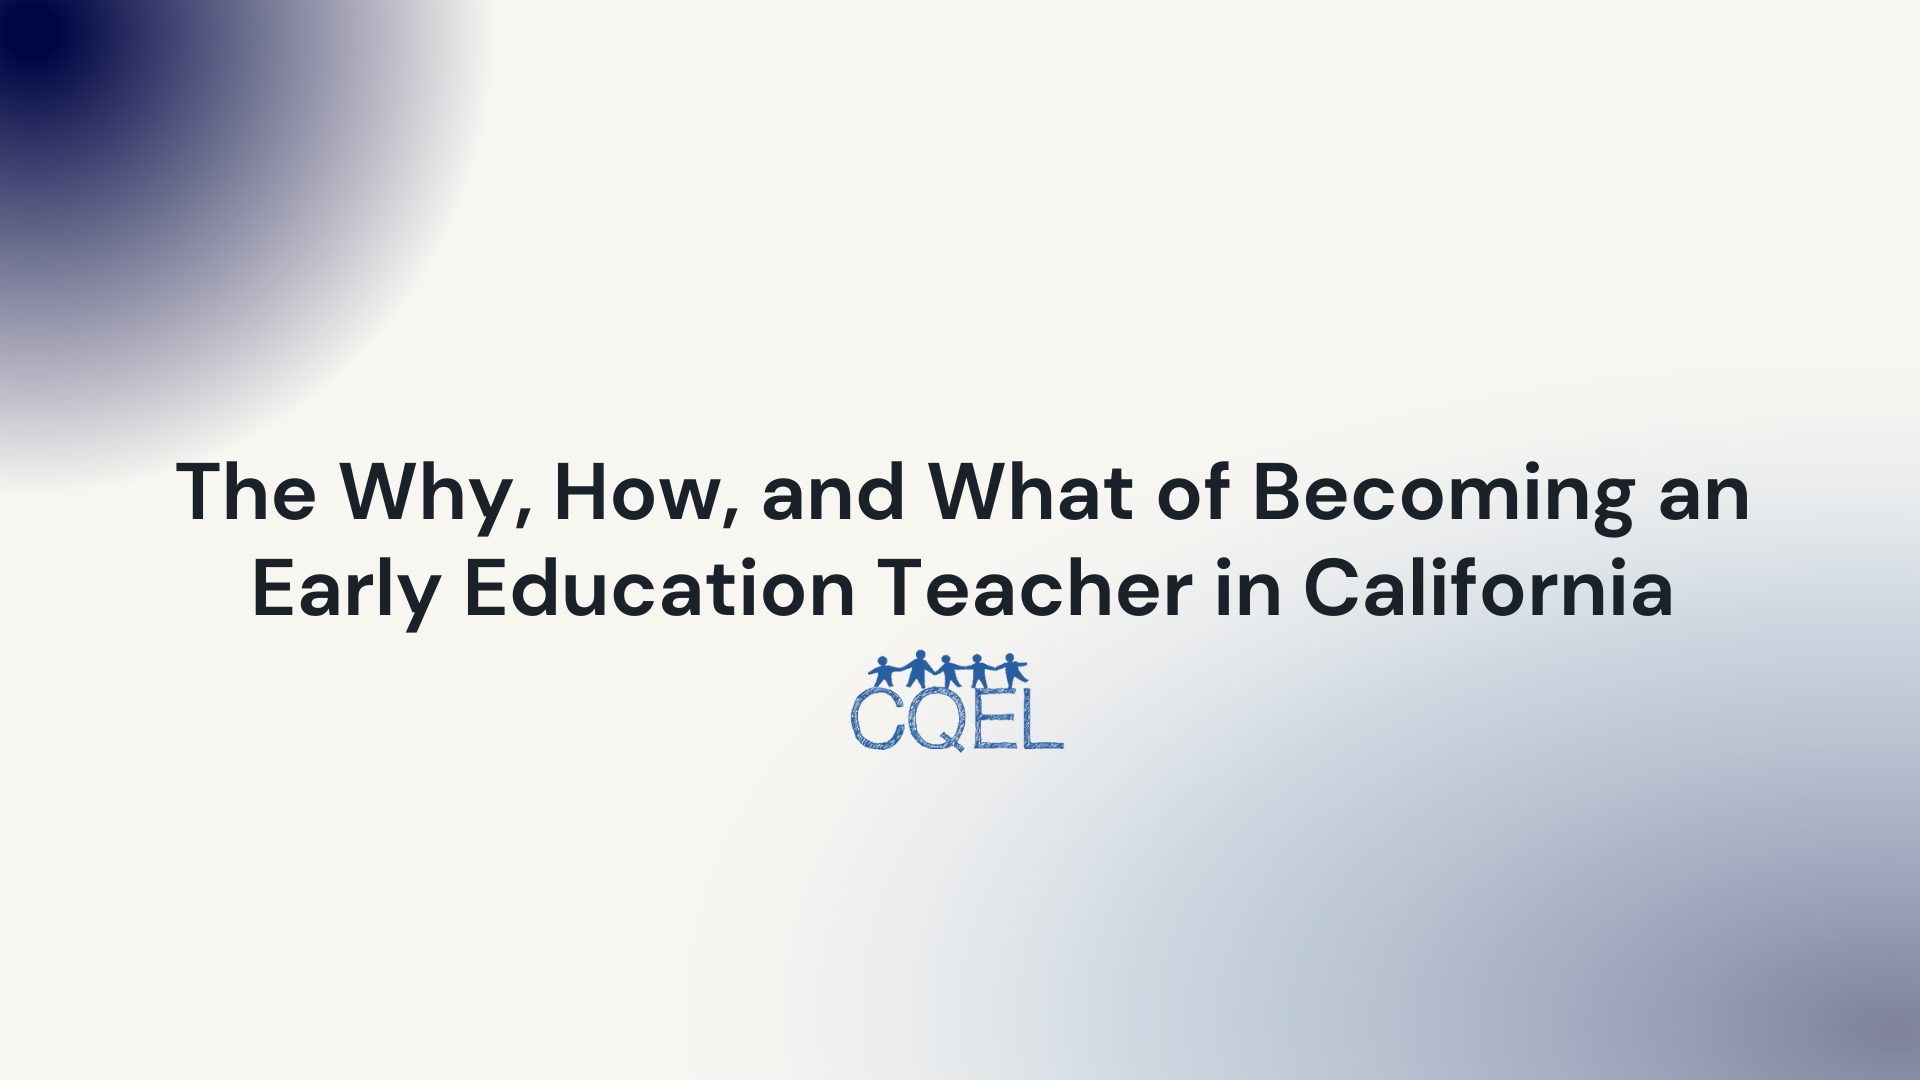 The Why, How, and What of Becoming an Early Education Teacher in California